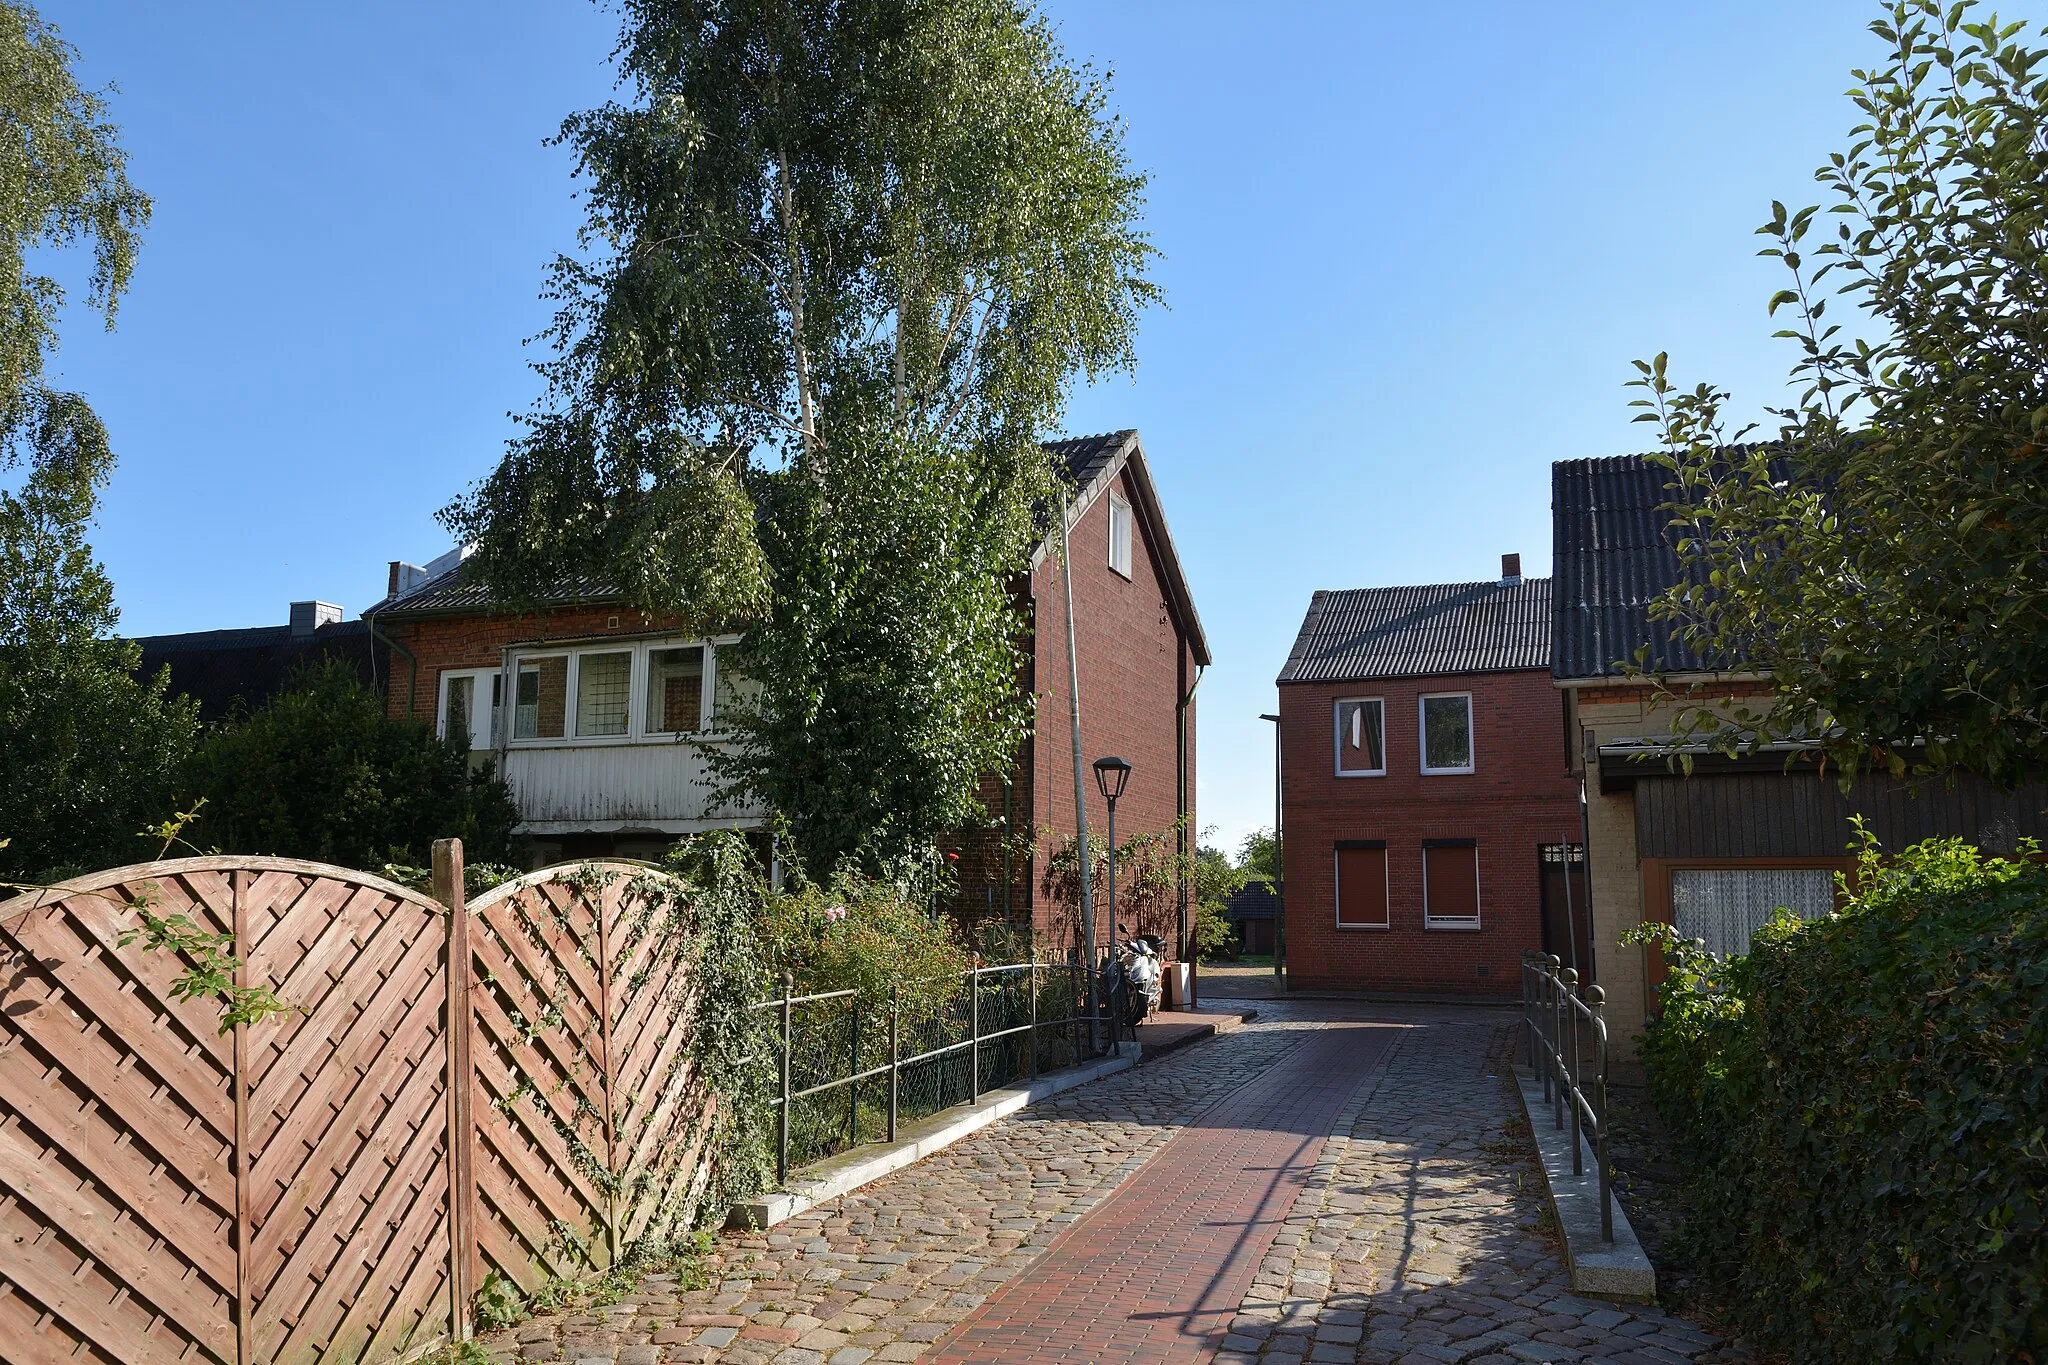 Photo showing: Crossroad between Rathausstraße (opposite No. 10) and Breitestraße in Krempe, German federal state of Schleswig-Holstein, formerly one of six bridges over the old Krempau-river, once navigable from the back of town hall.